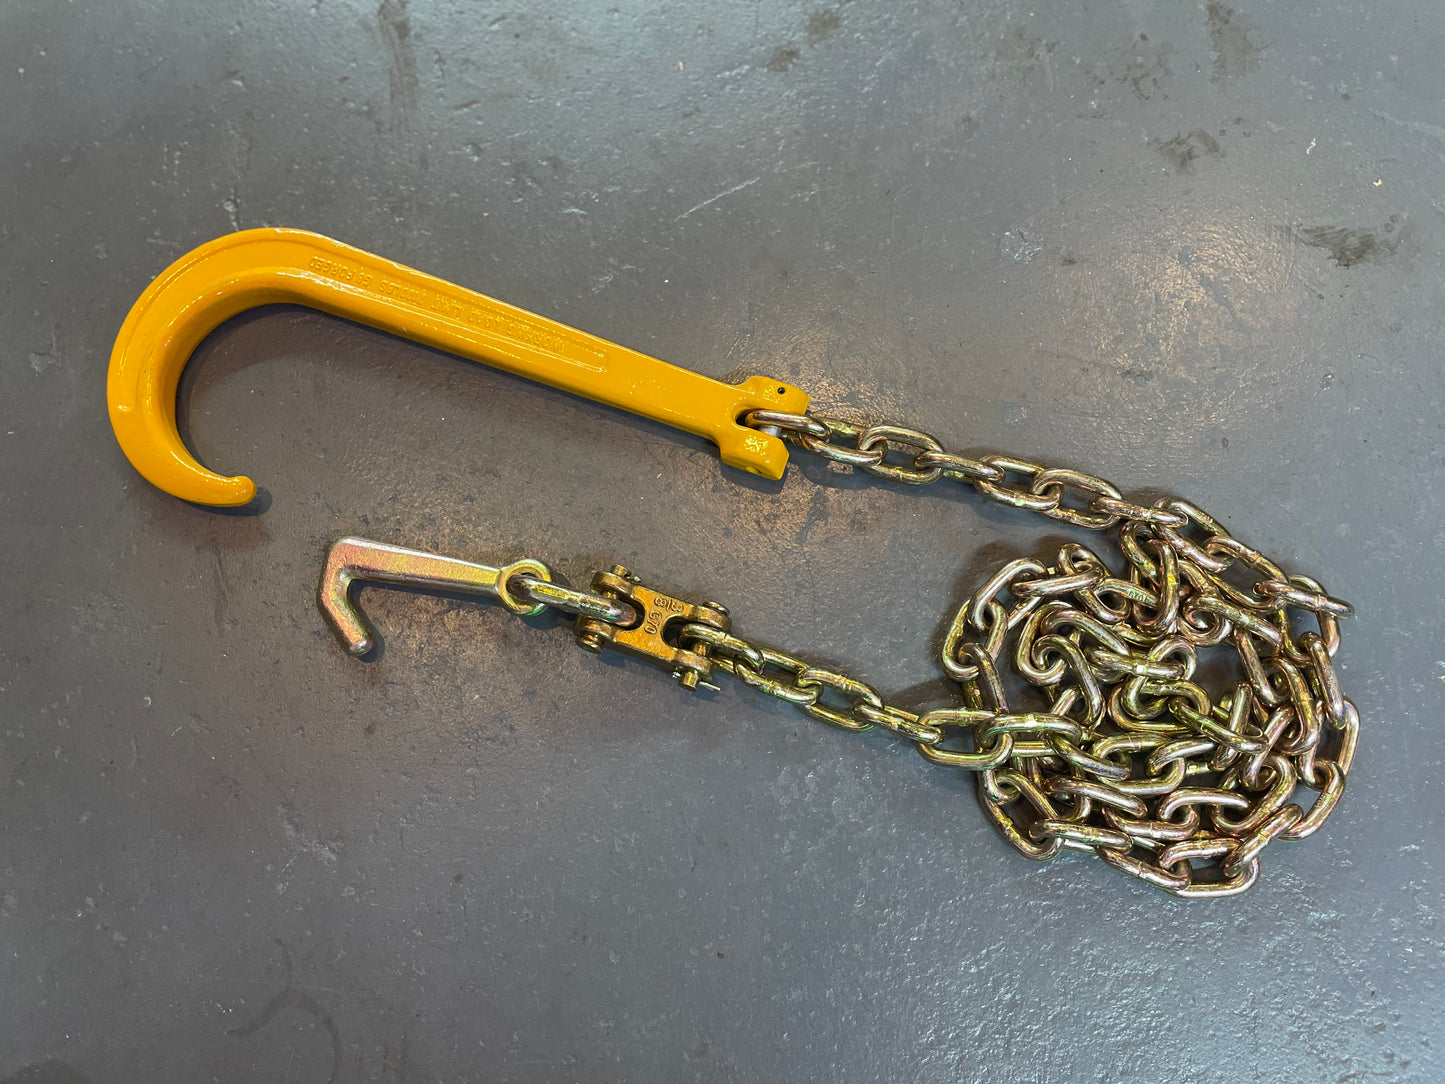 5/16 X 8' Safety Chain w/ G80 15" J hook and Mini J hook on other end for Rollback Tow Trucks